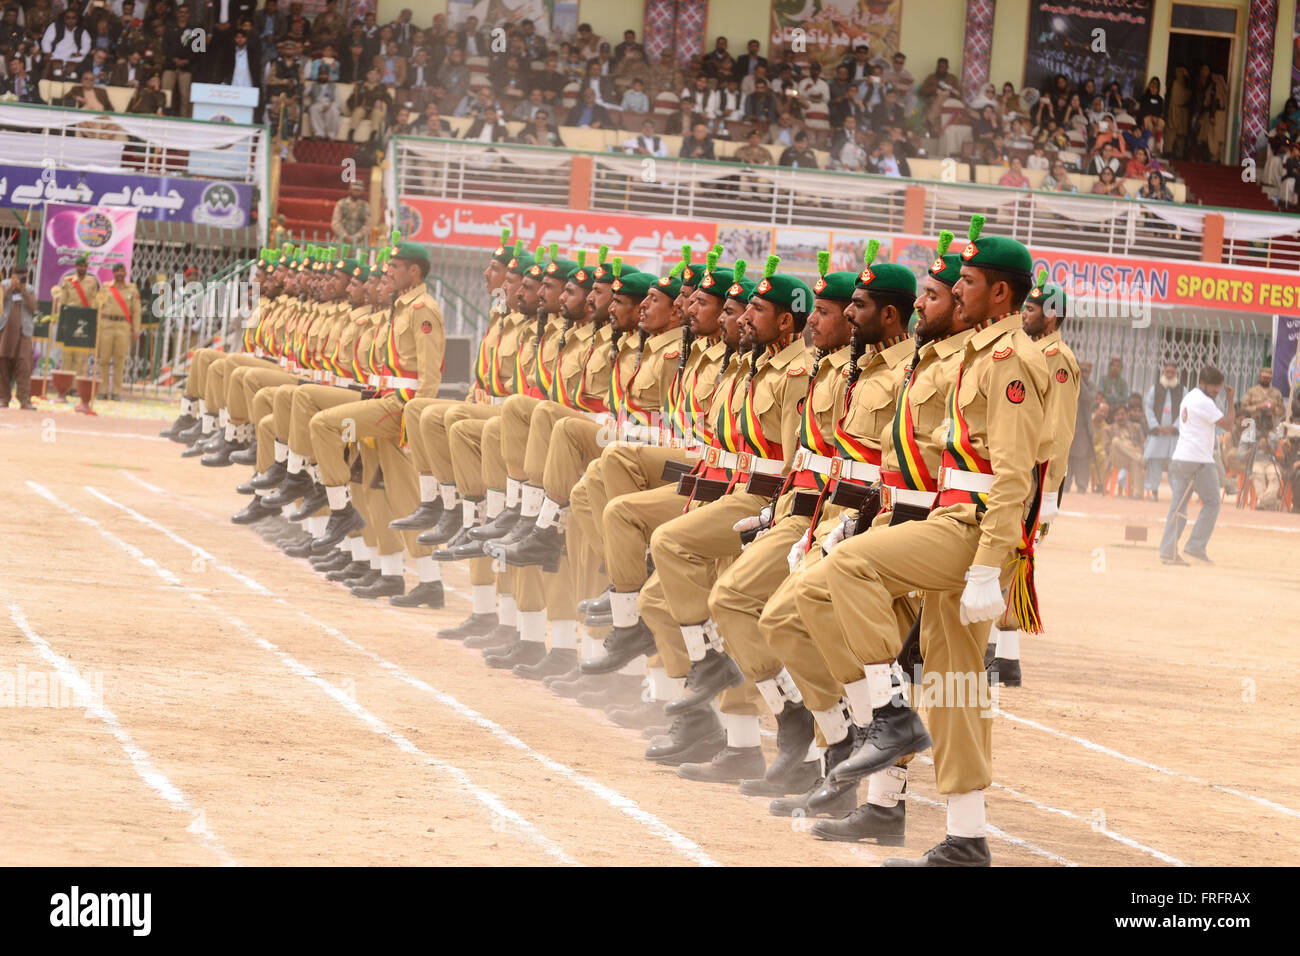 Balochistan, Pakistan. 22nd Mar, 2016. Army personal are presenting the parade on front of the stage during the opening ceremony of Balochistan Sports Festival 2016 On the occasion of Pakistan Day. Organized by Government of Balochistan in collaboration with Pakistan Army. Credit:  Din Muhammad Watanpaal/Alamy Live News Stock Photo